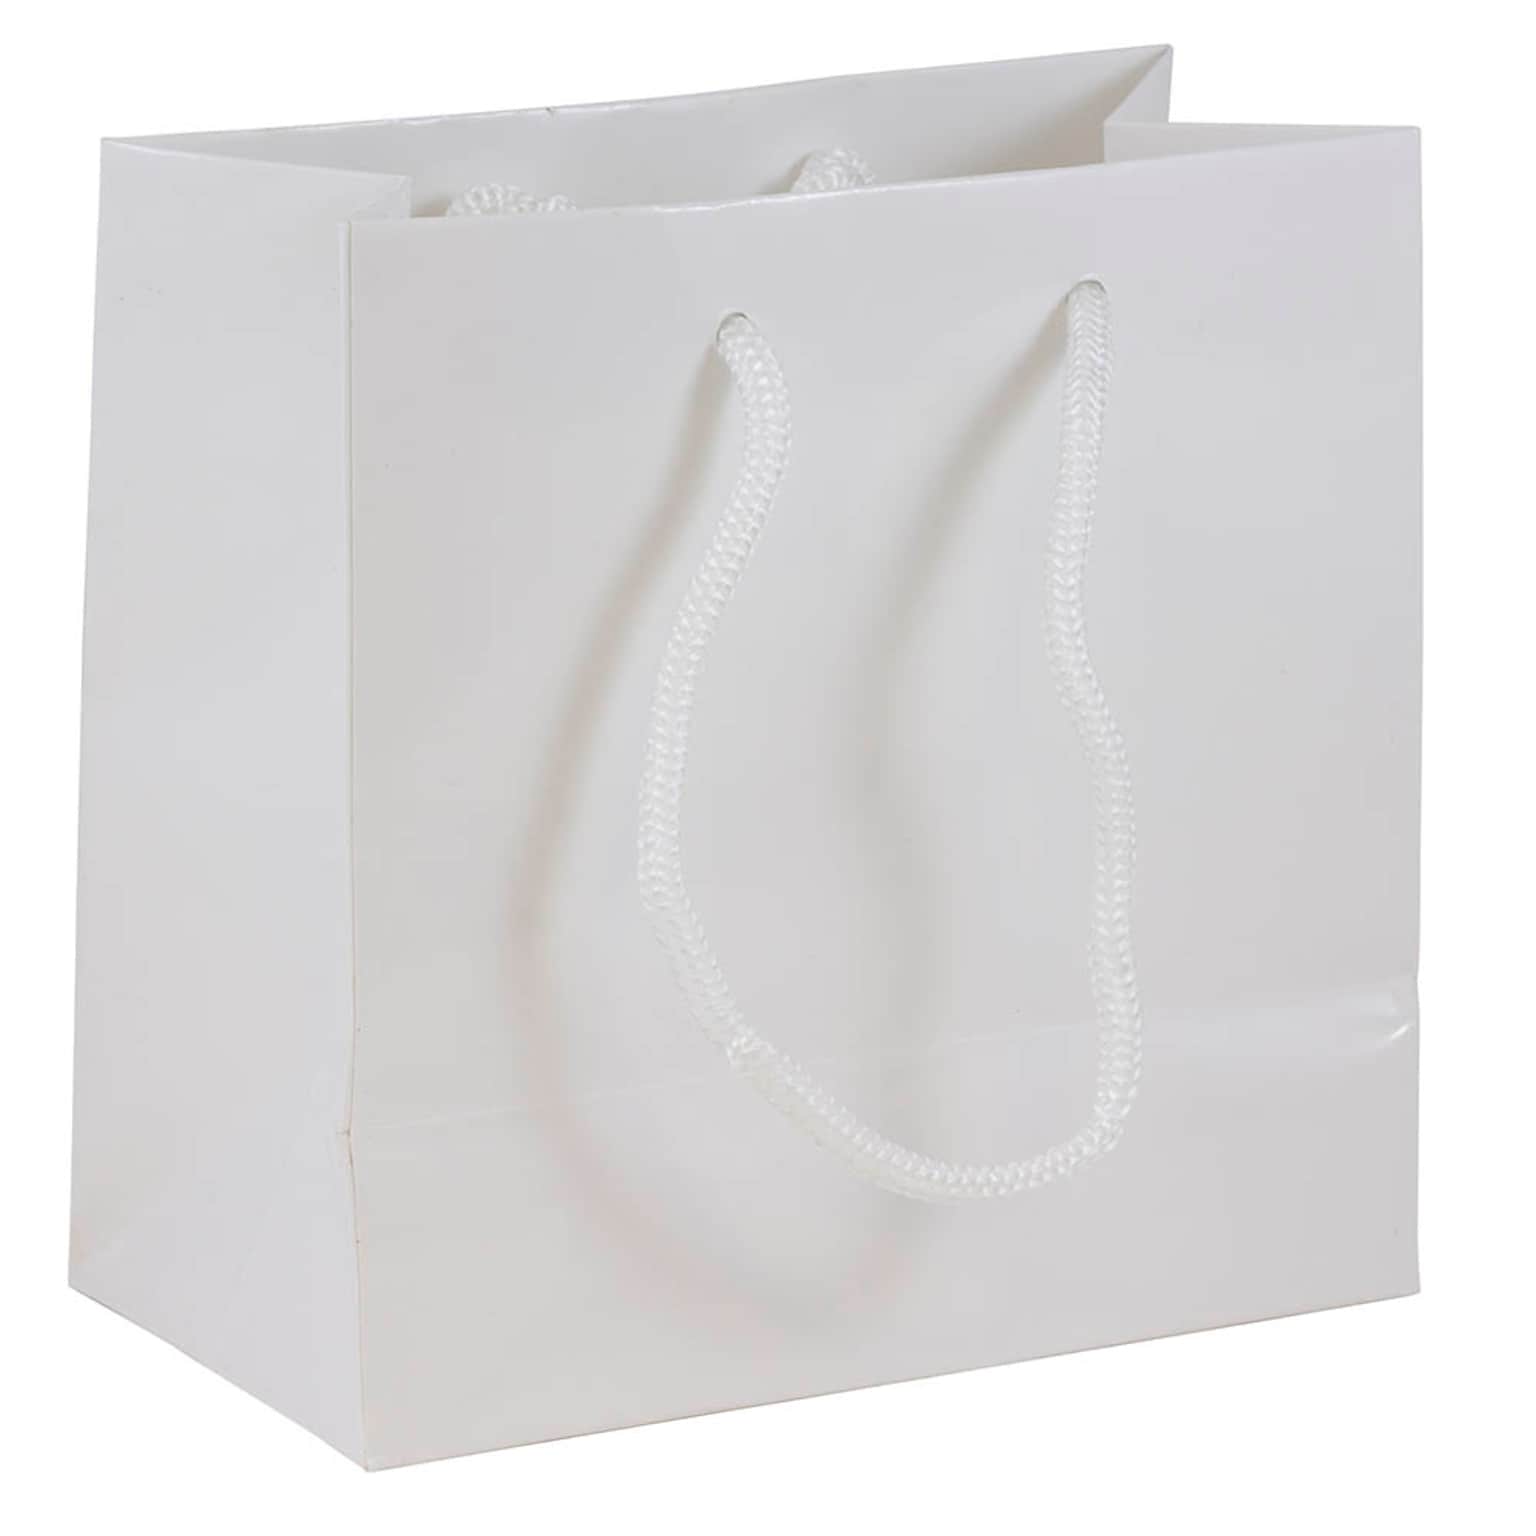 JAM Paper Glossy Gift Bag with Rope Handles, Small, White, 3 Bags/Pack (896GLWHA)